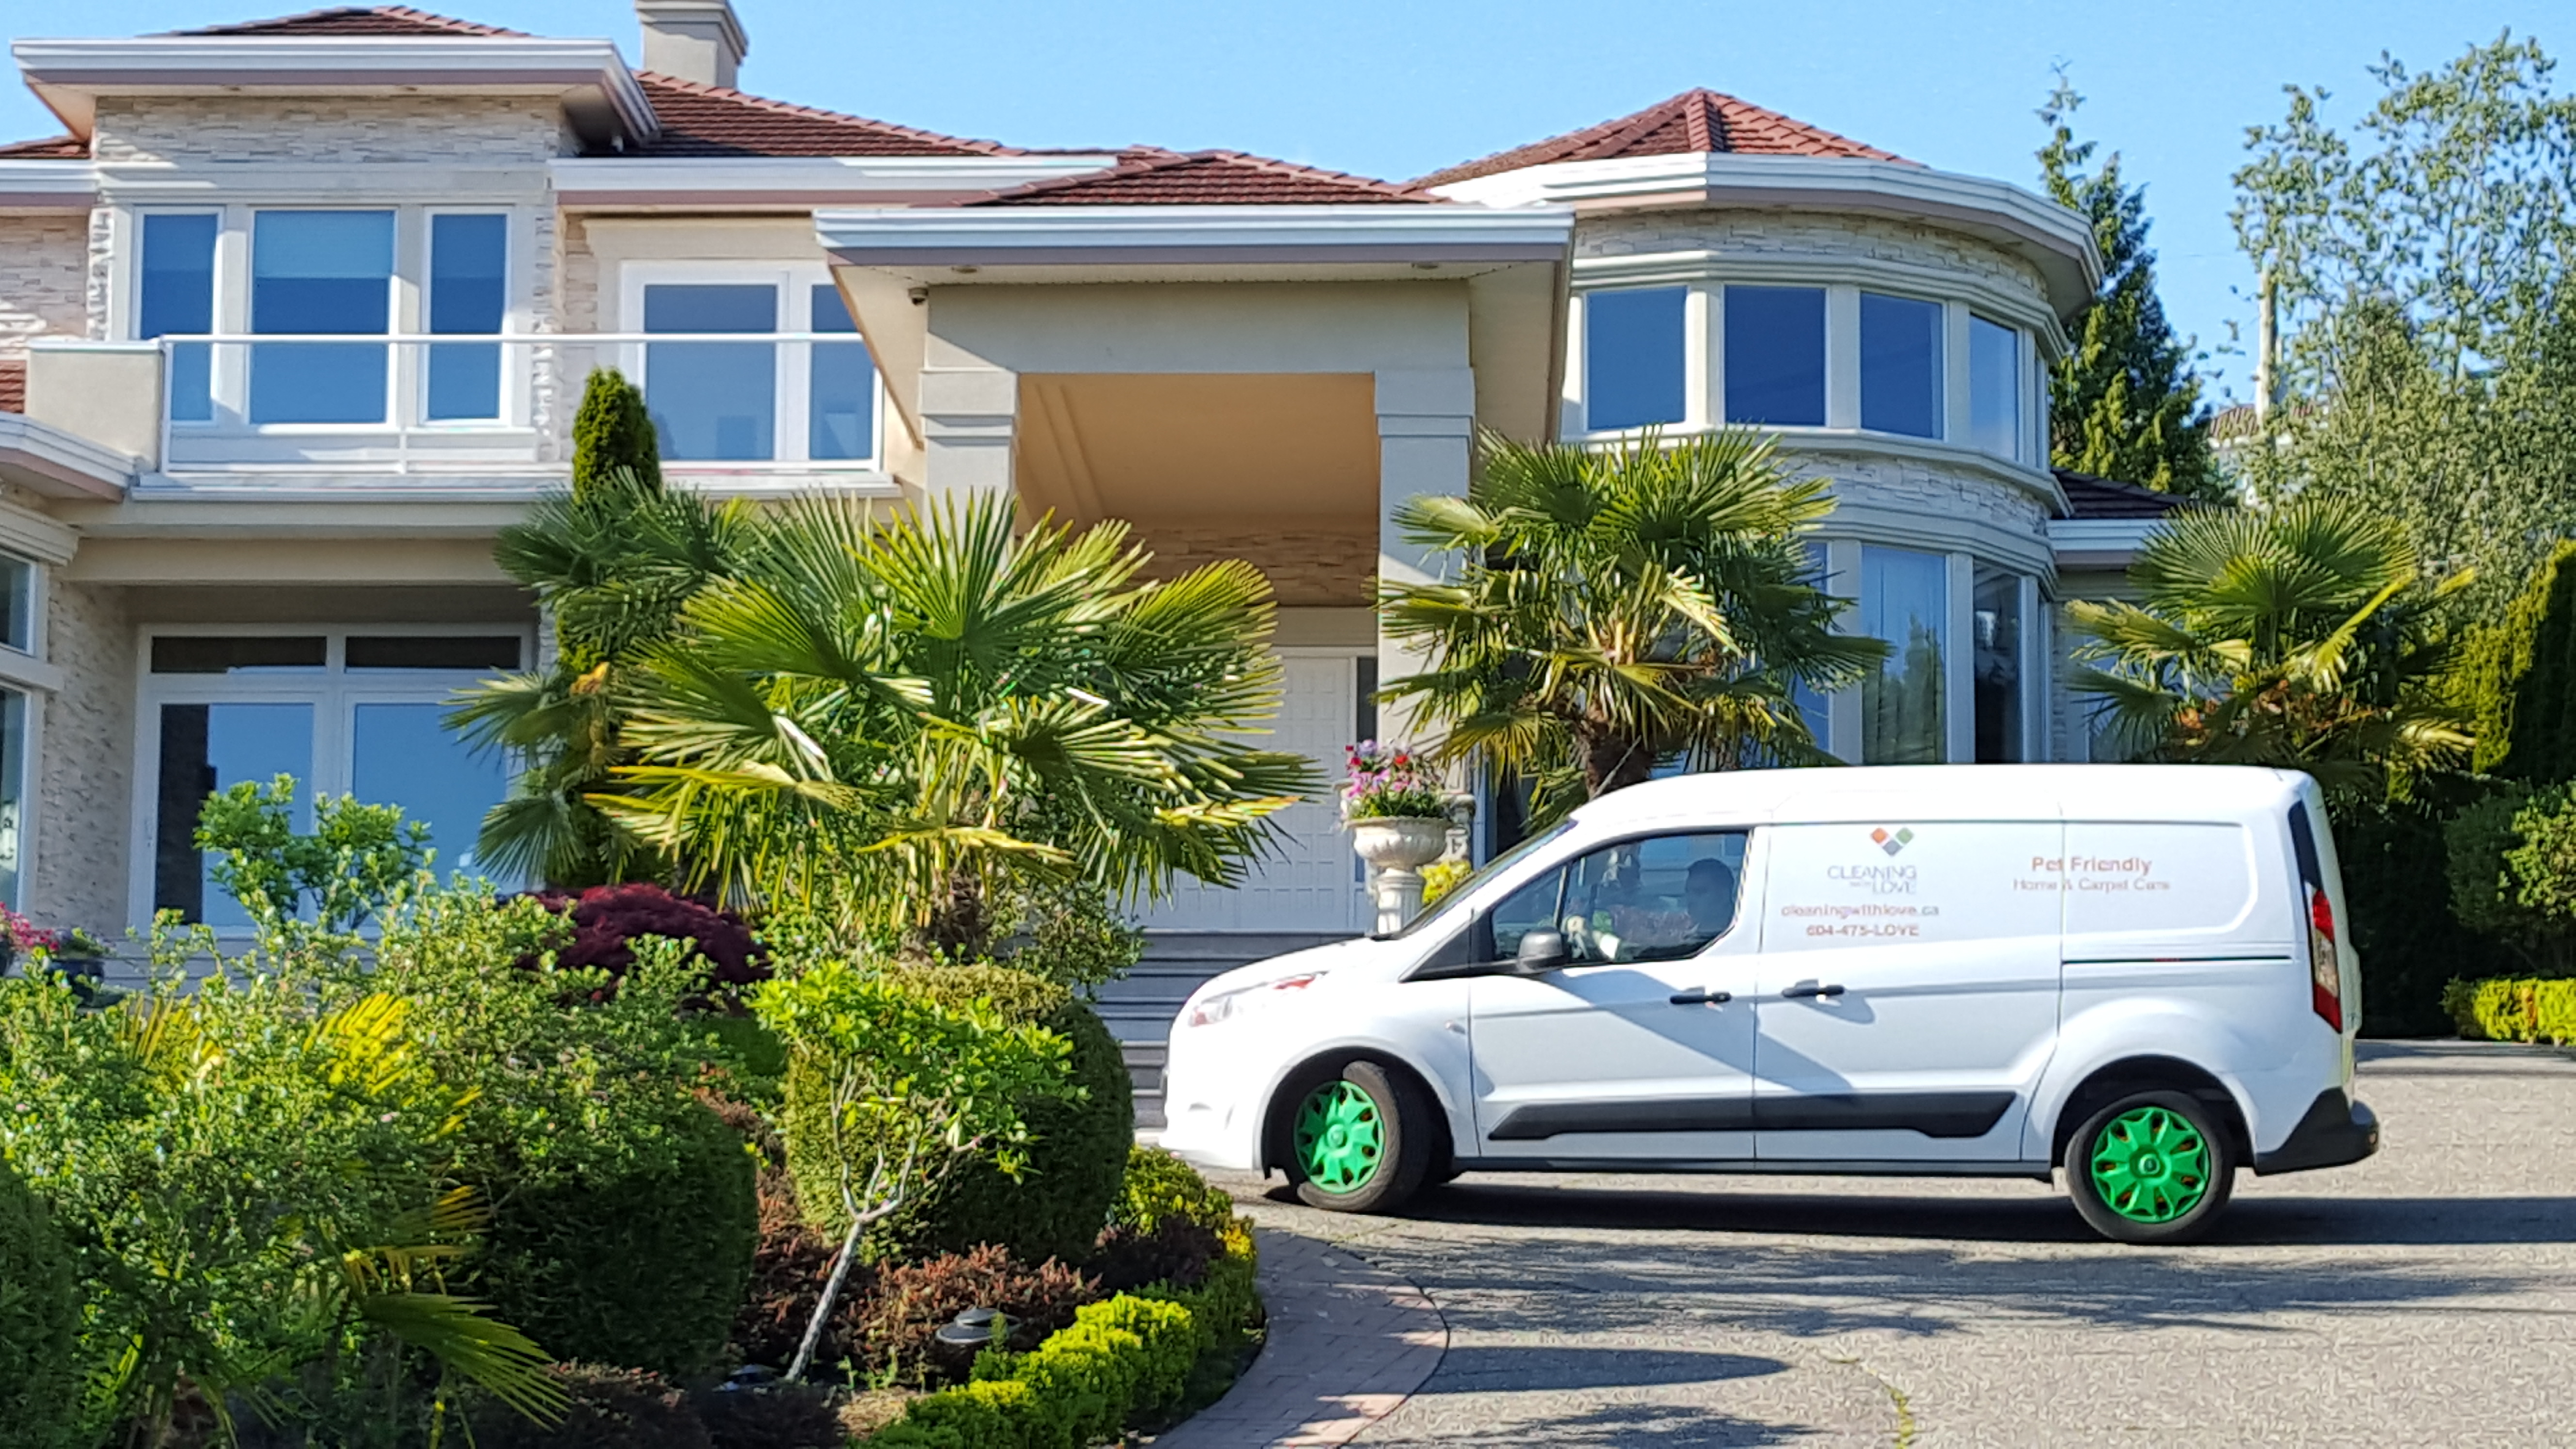 Cleaning with Love van outside West Vancouver home